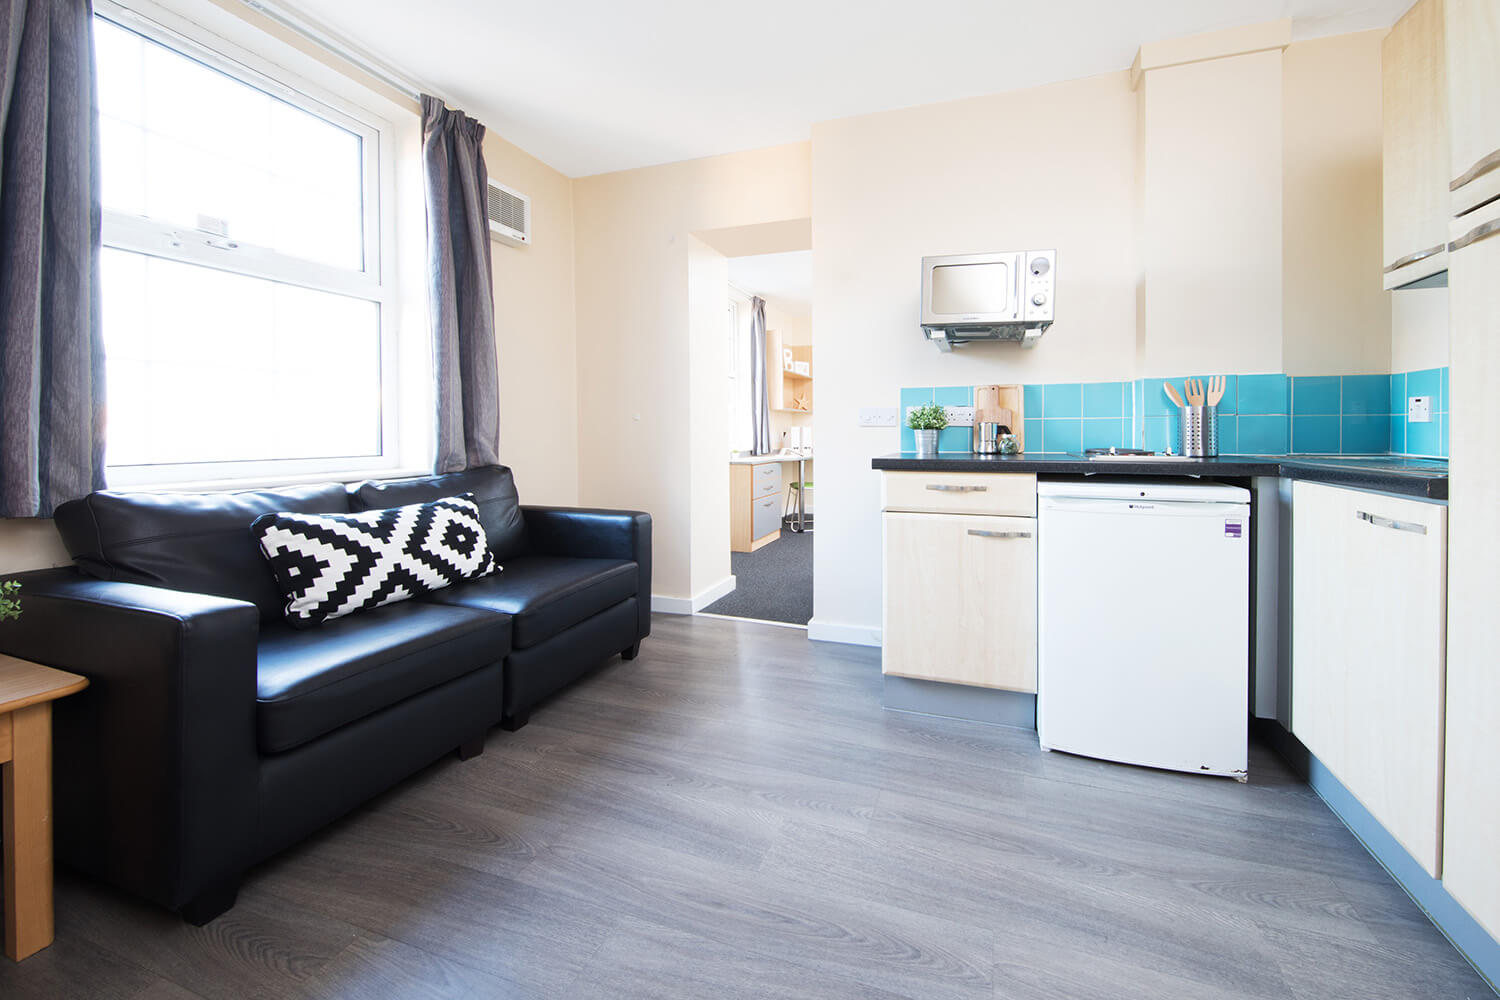 Kitchen student accommodation in Liverpool